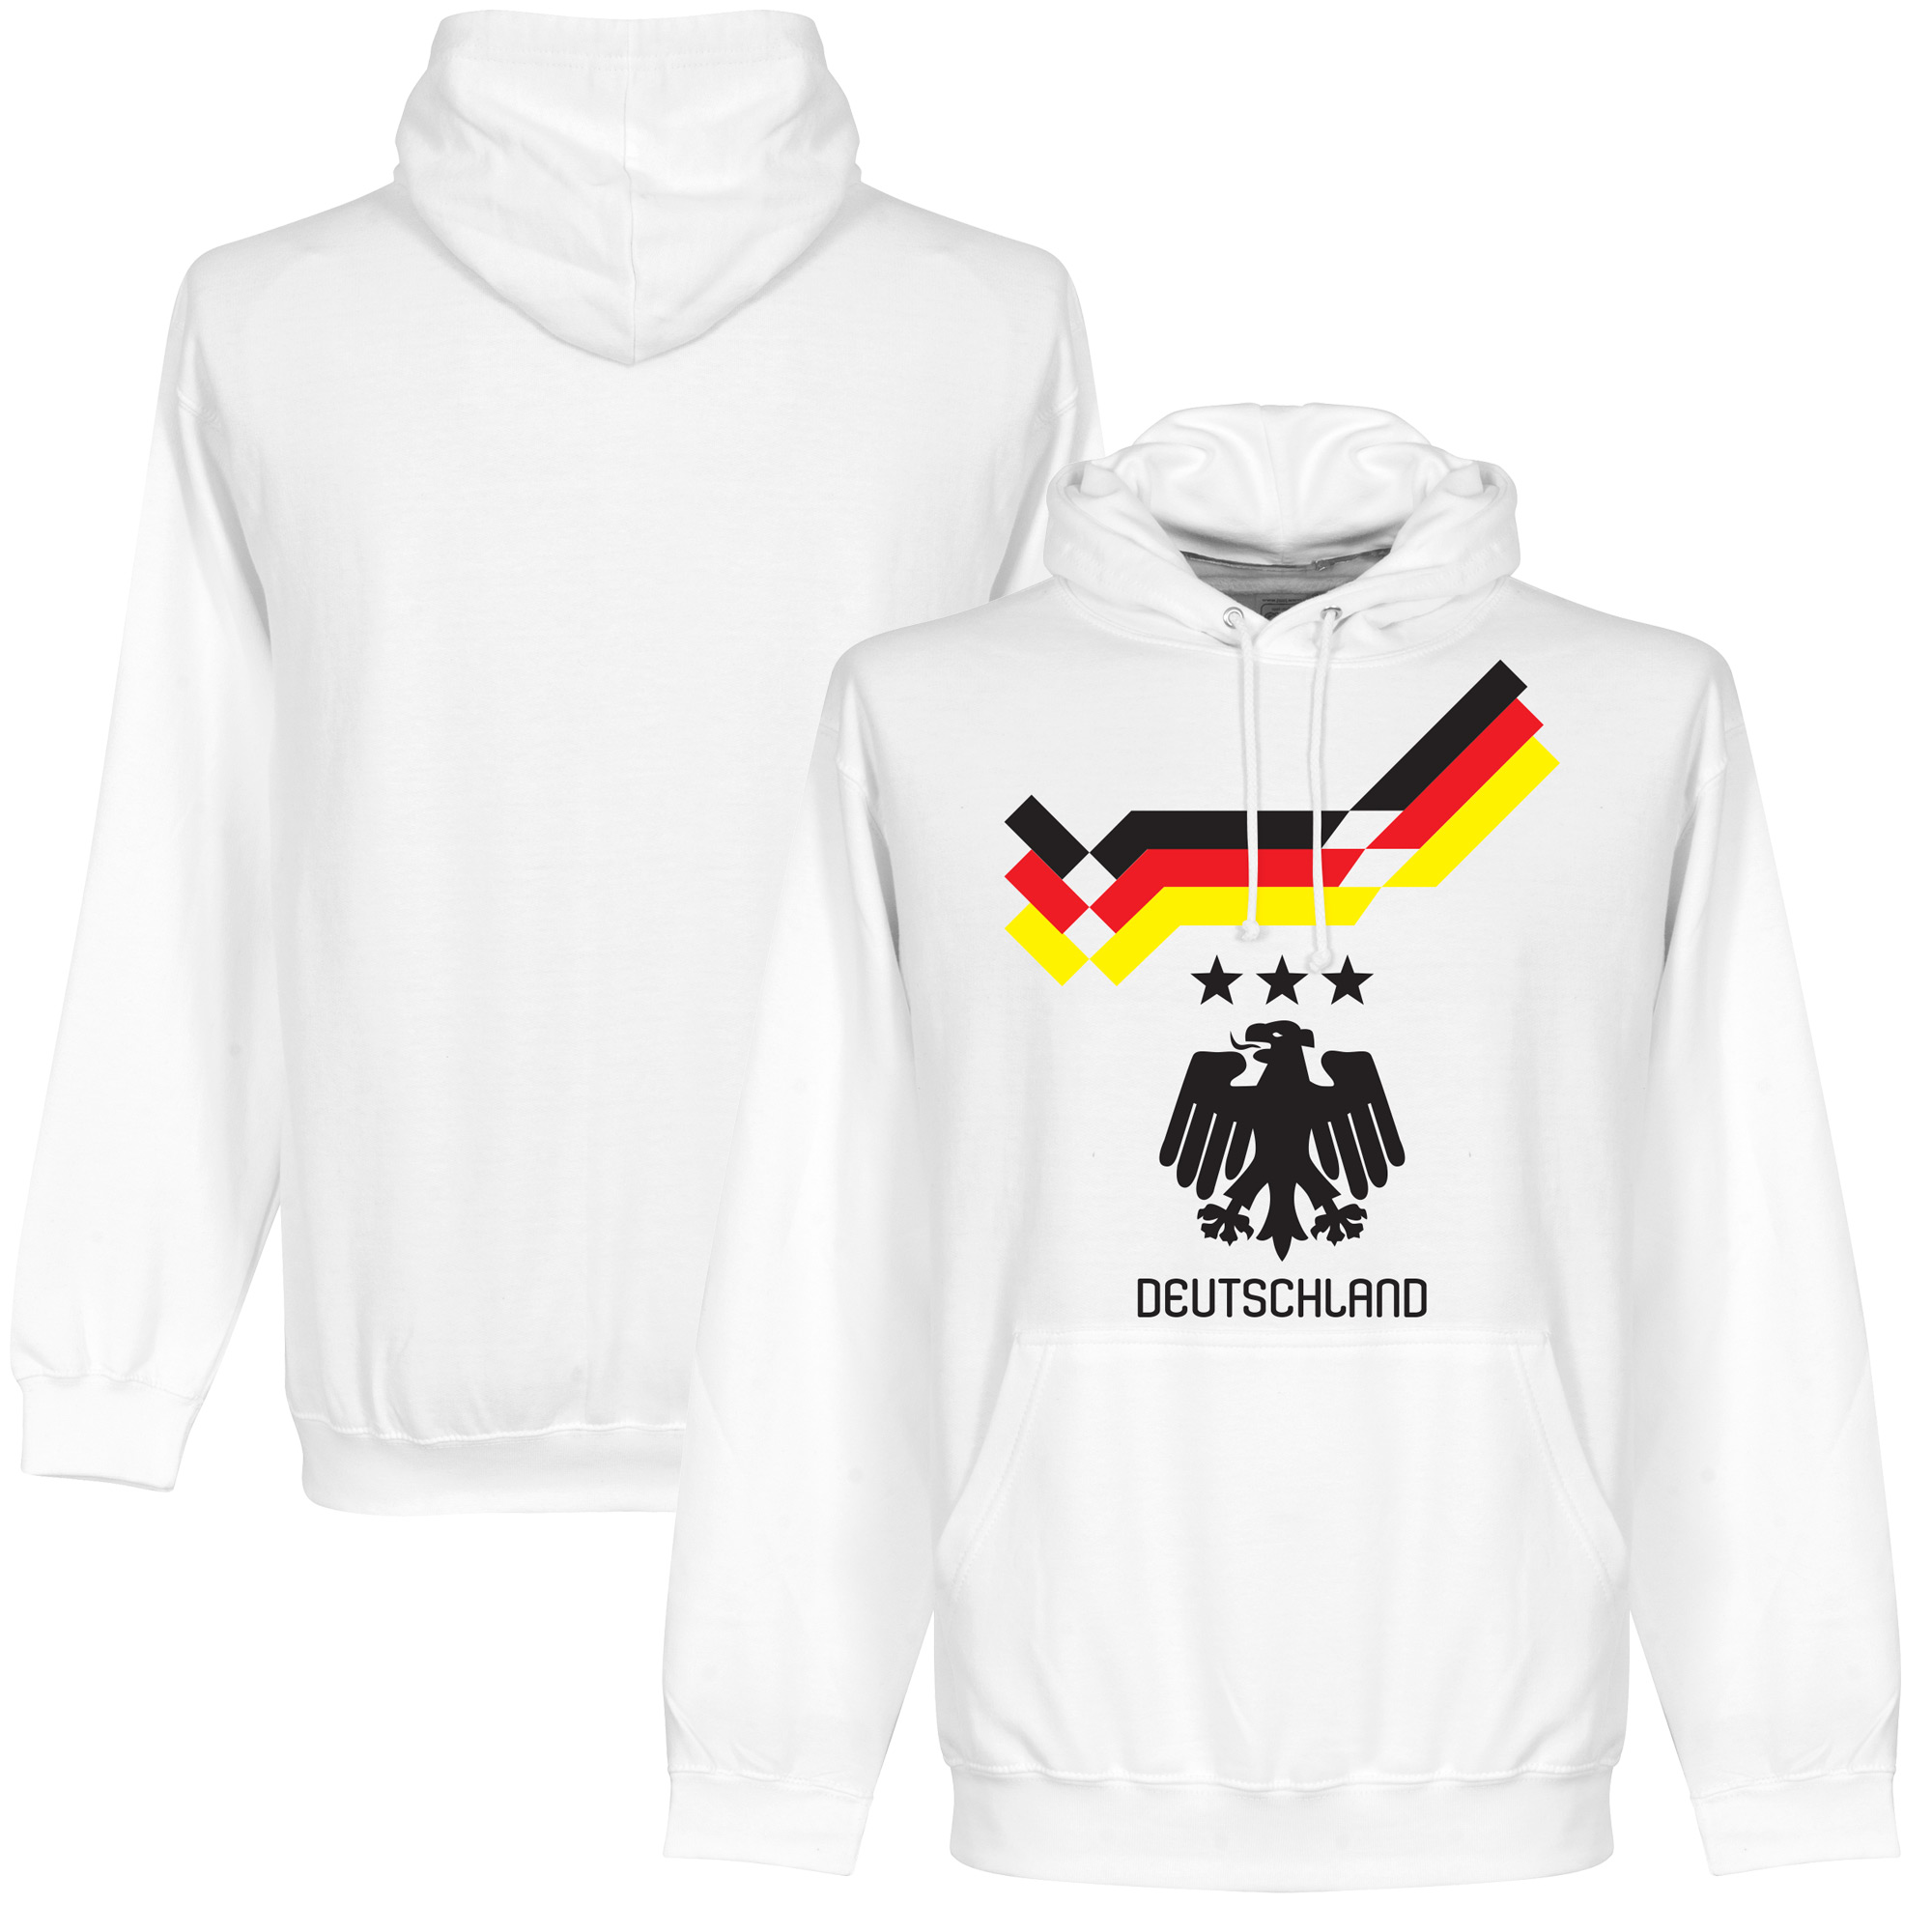 Duitsland 1990 Hooded Sweater S